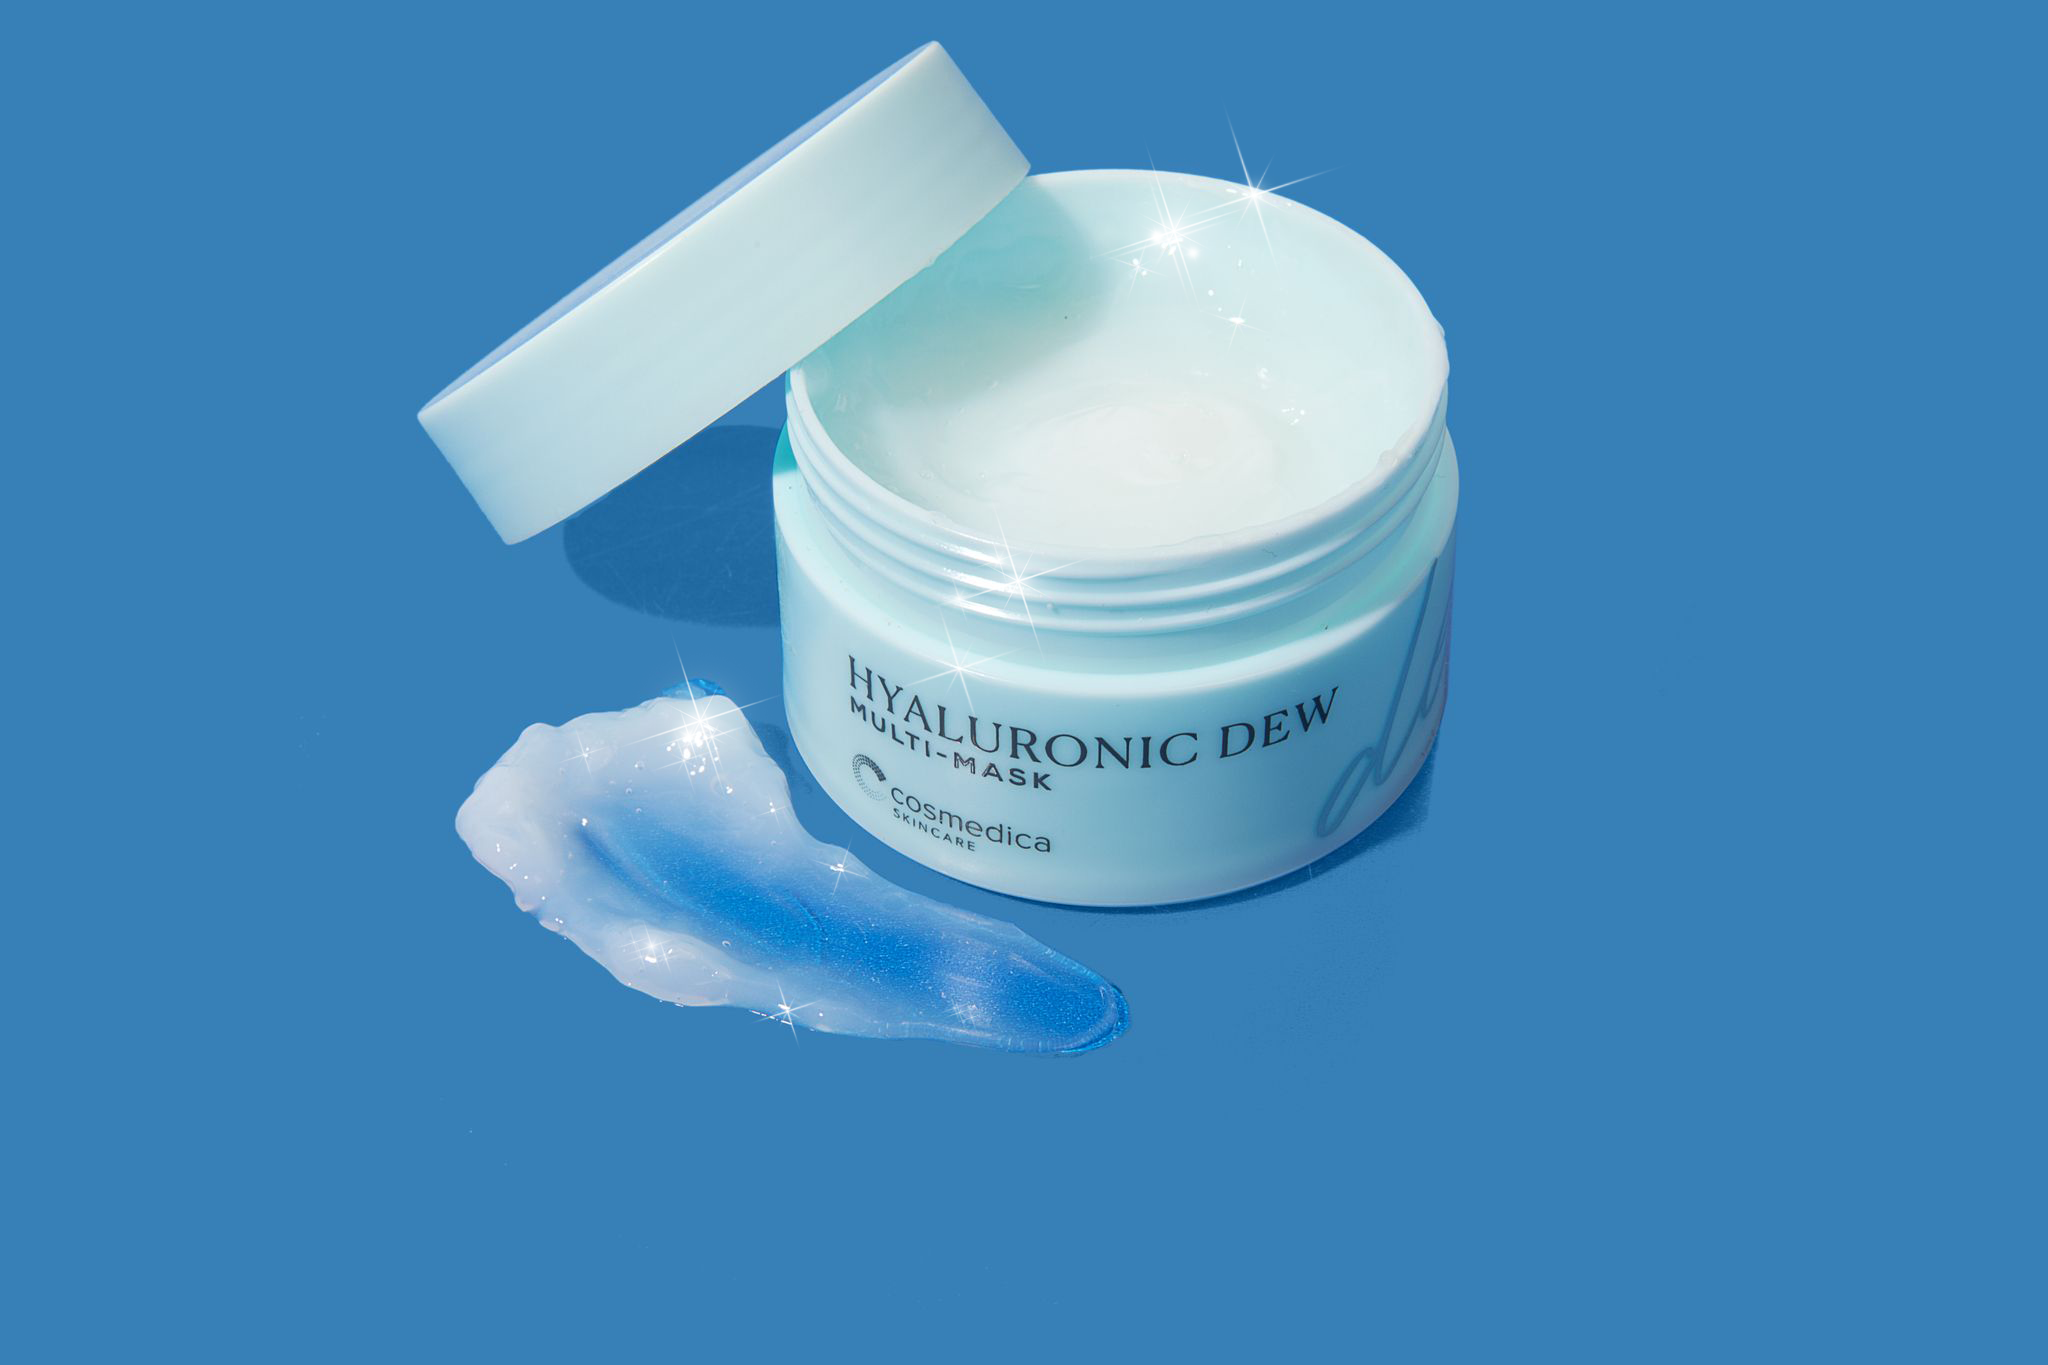 Say Goodbye to Dull Skin with a Hyaluronic Dew Multi Mask